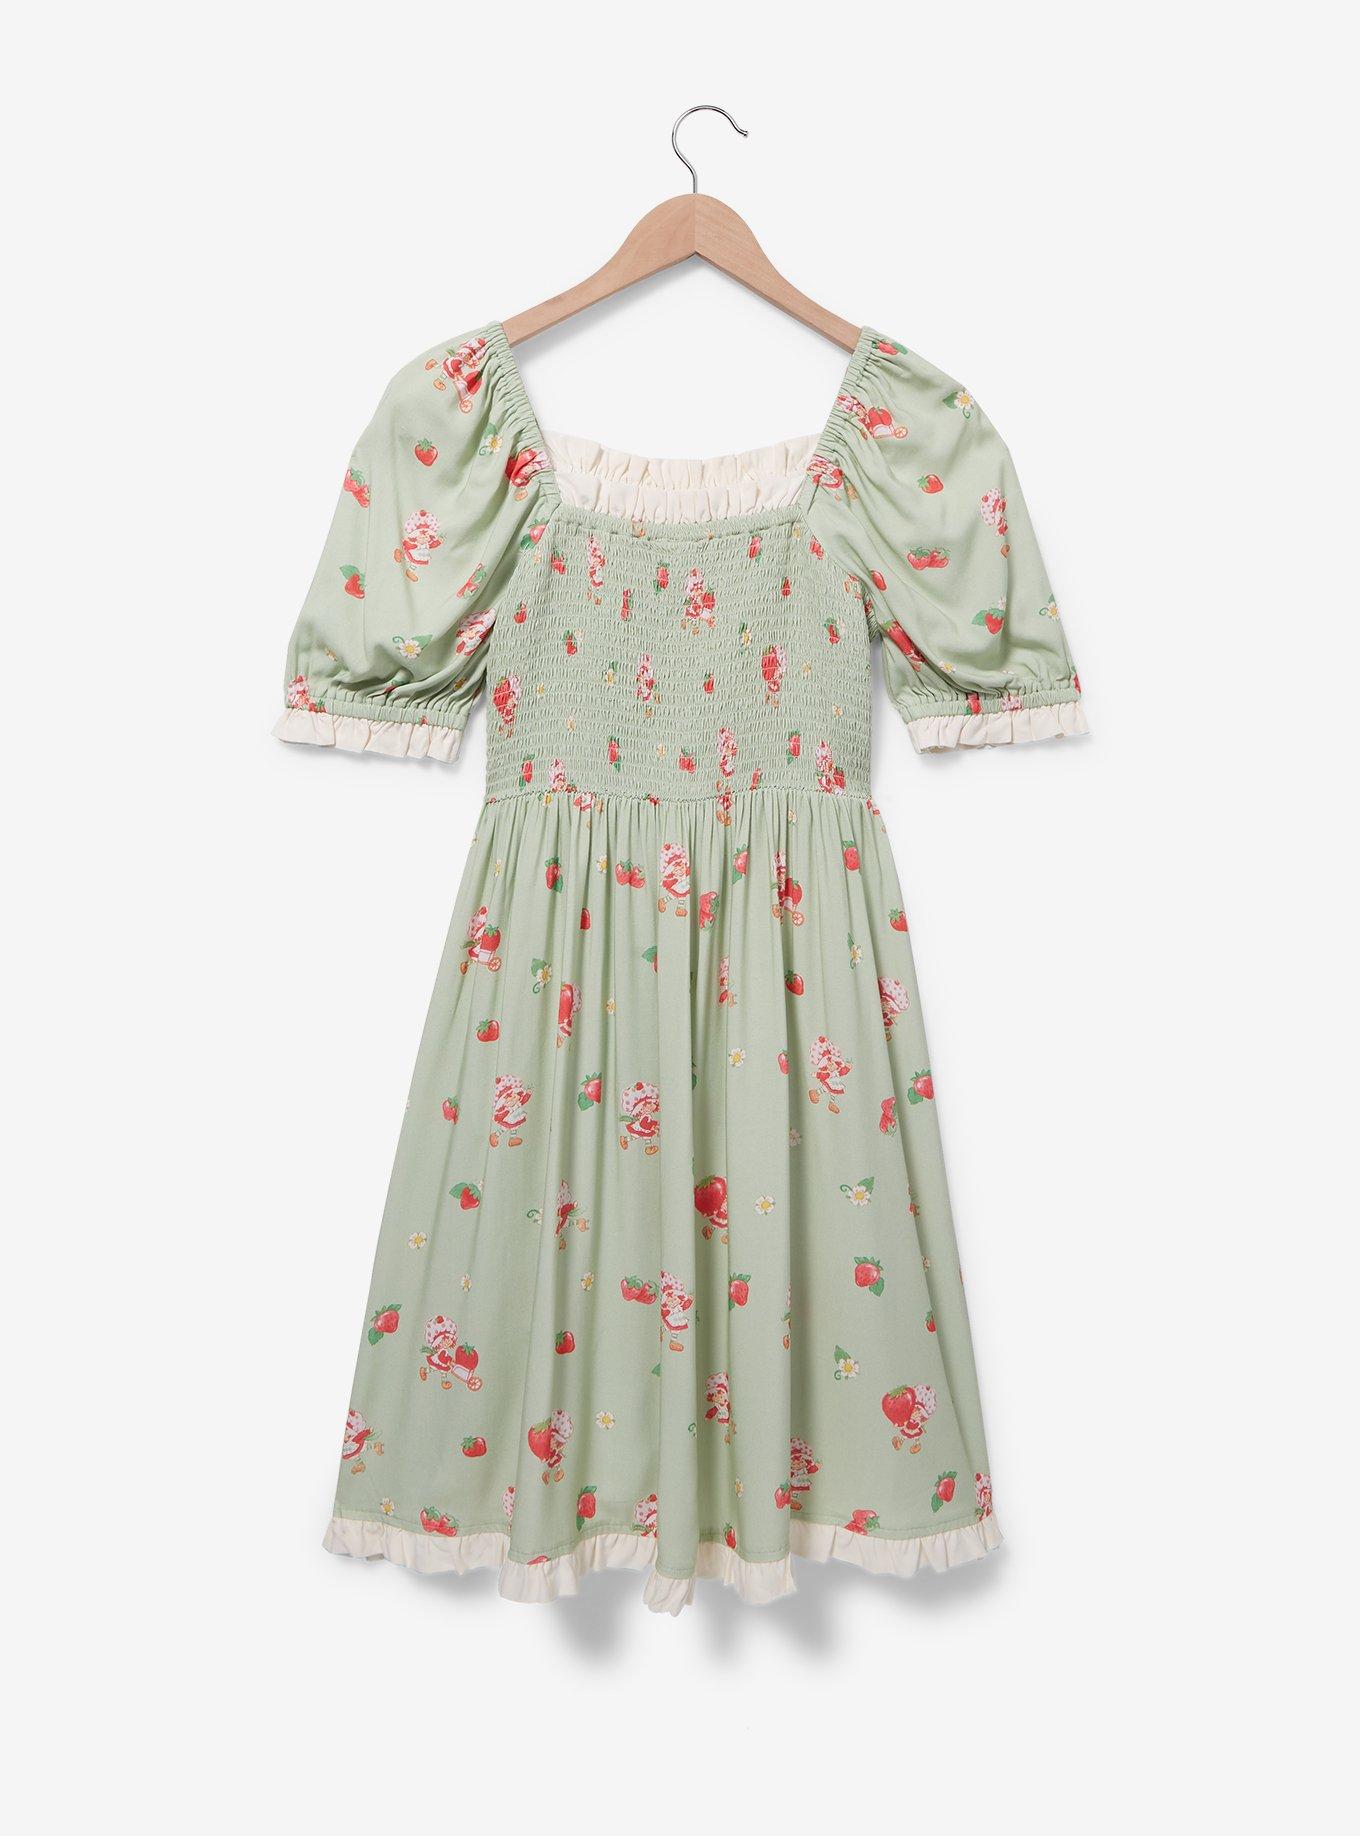 Strawberry Shortcake Allover Print Smock Dress - BoxLunch Exclusive, , hi-res